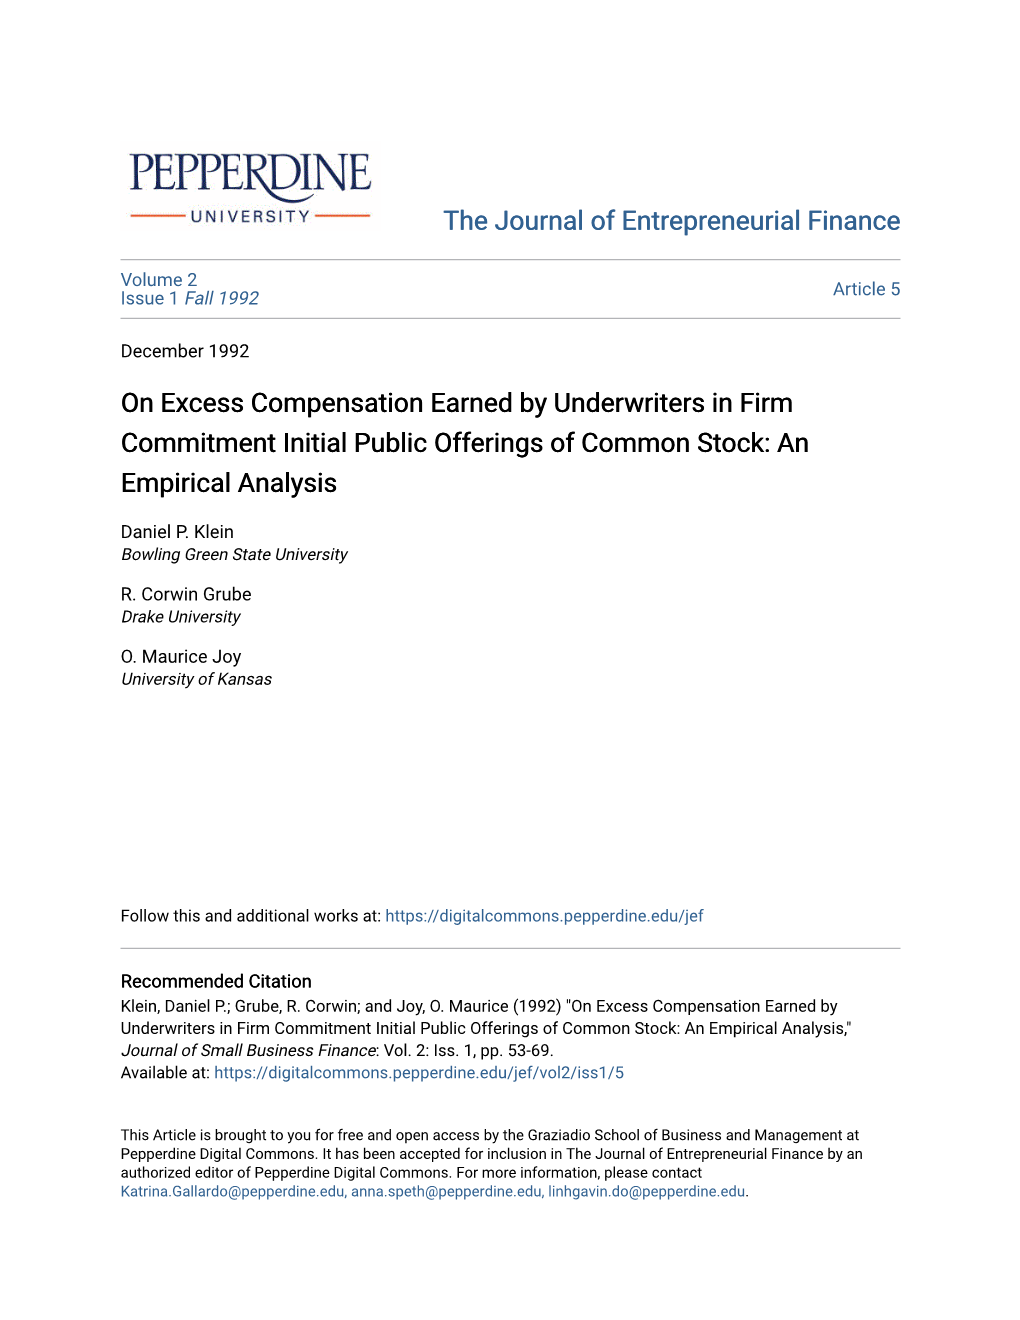 On Excess Compensation Earned by Underwriters in Firm Commitment Initial Public Offerings of Common Stock: an Empirical Analysis